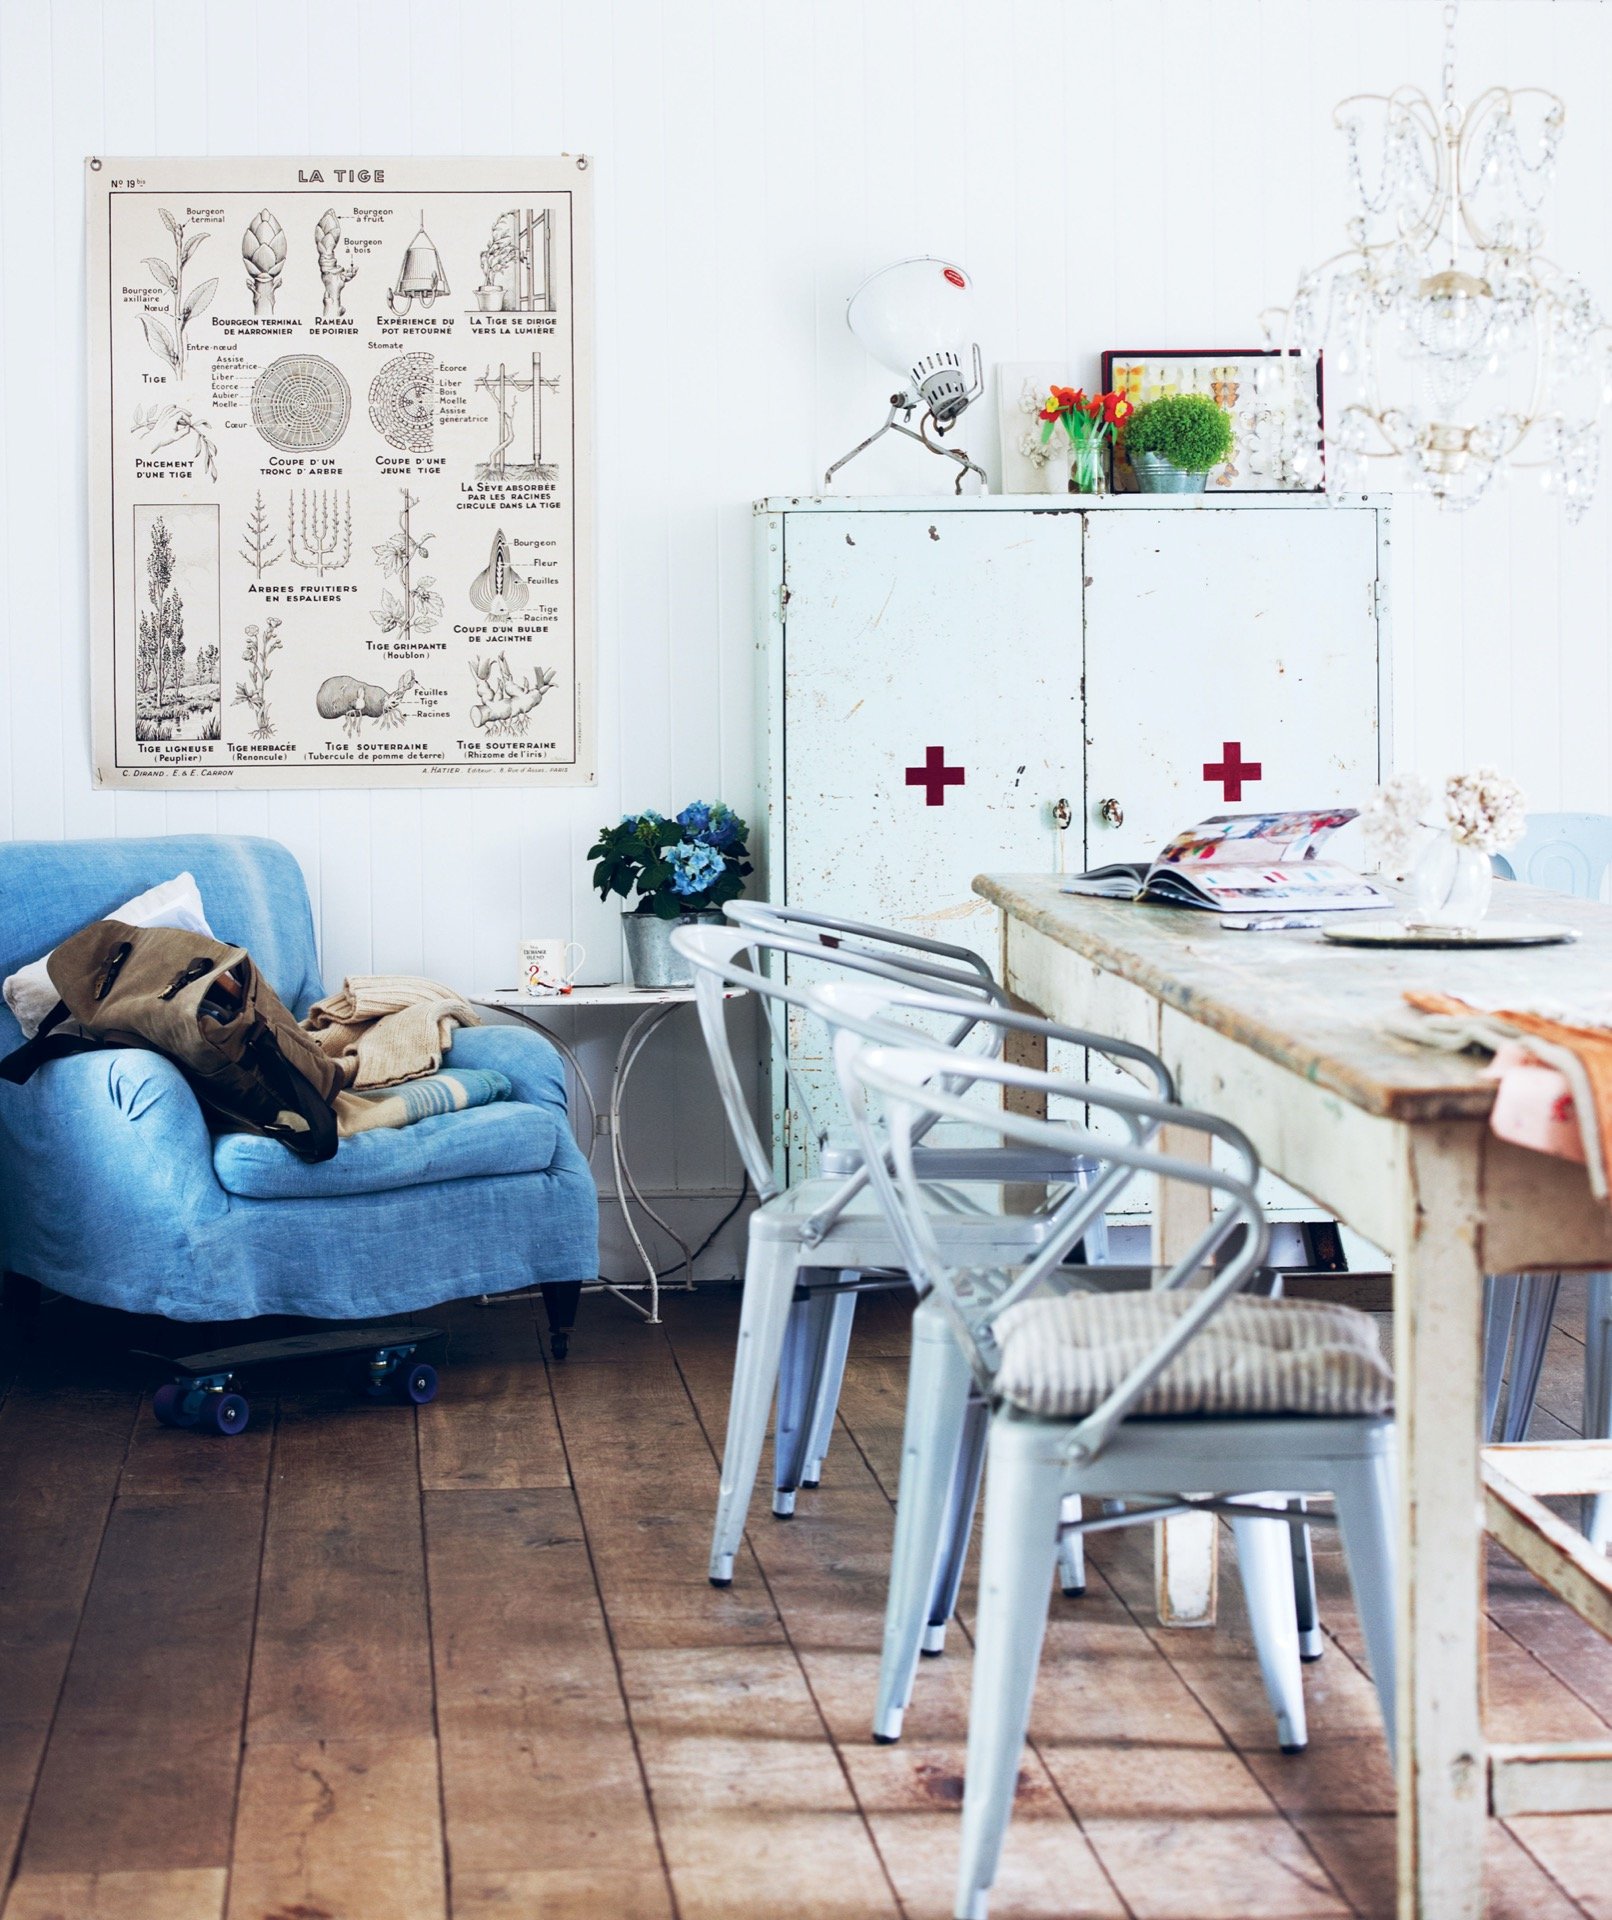 Dining area with vintage furniture and objects